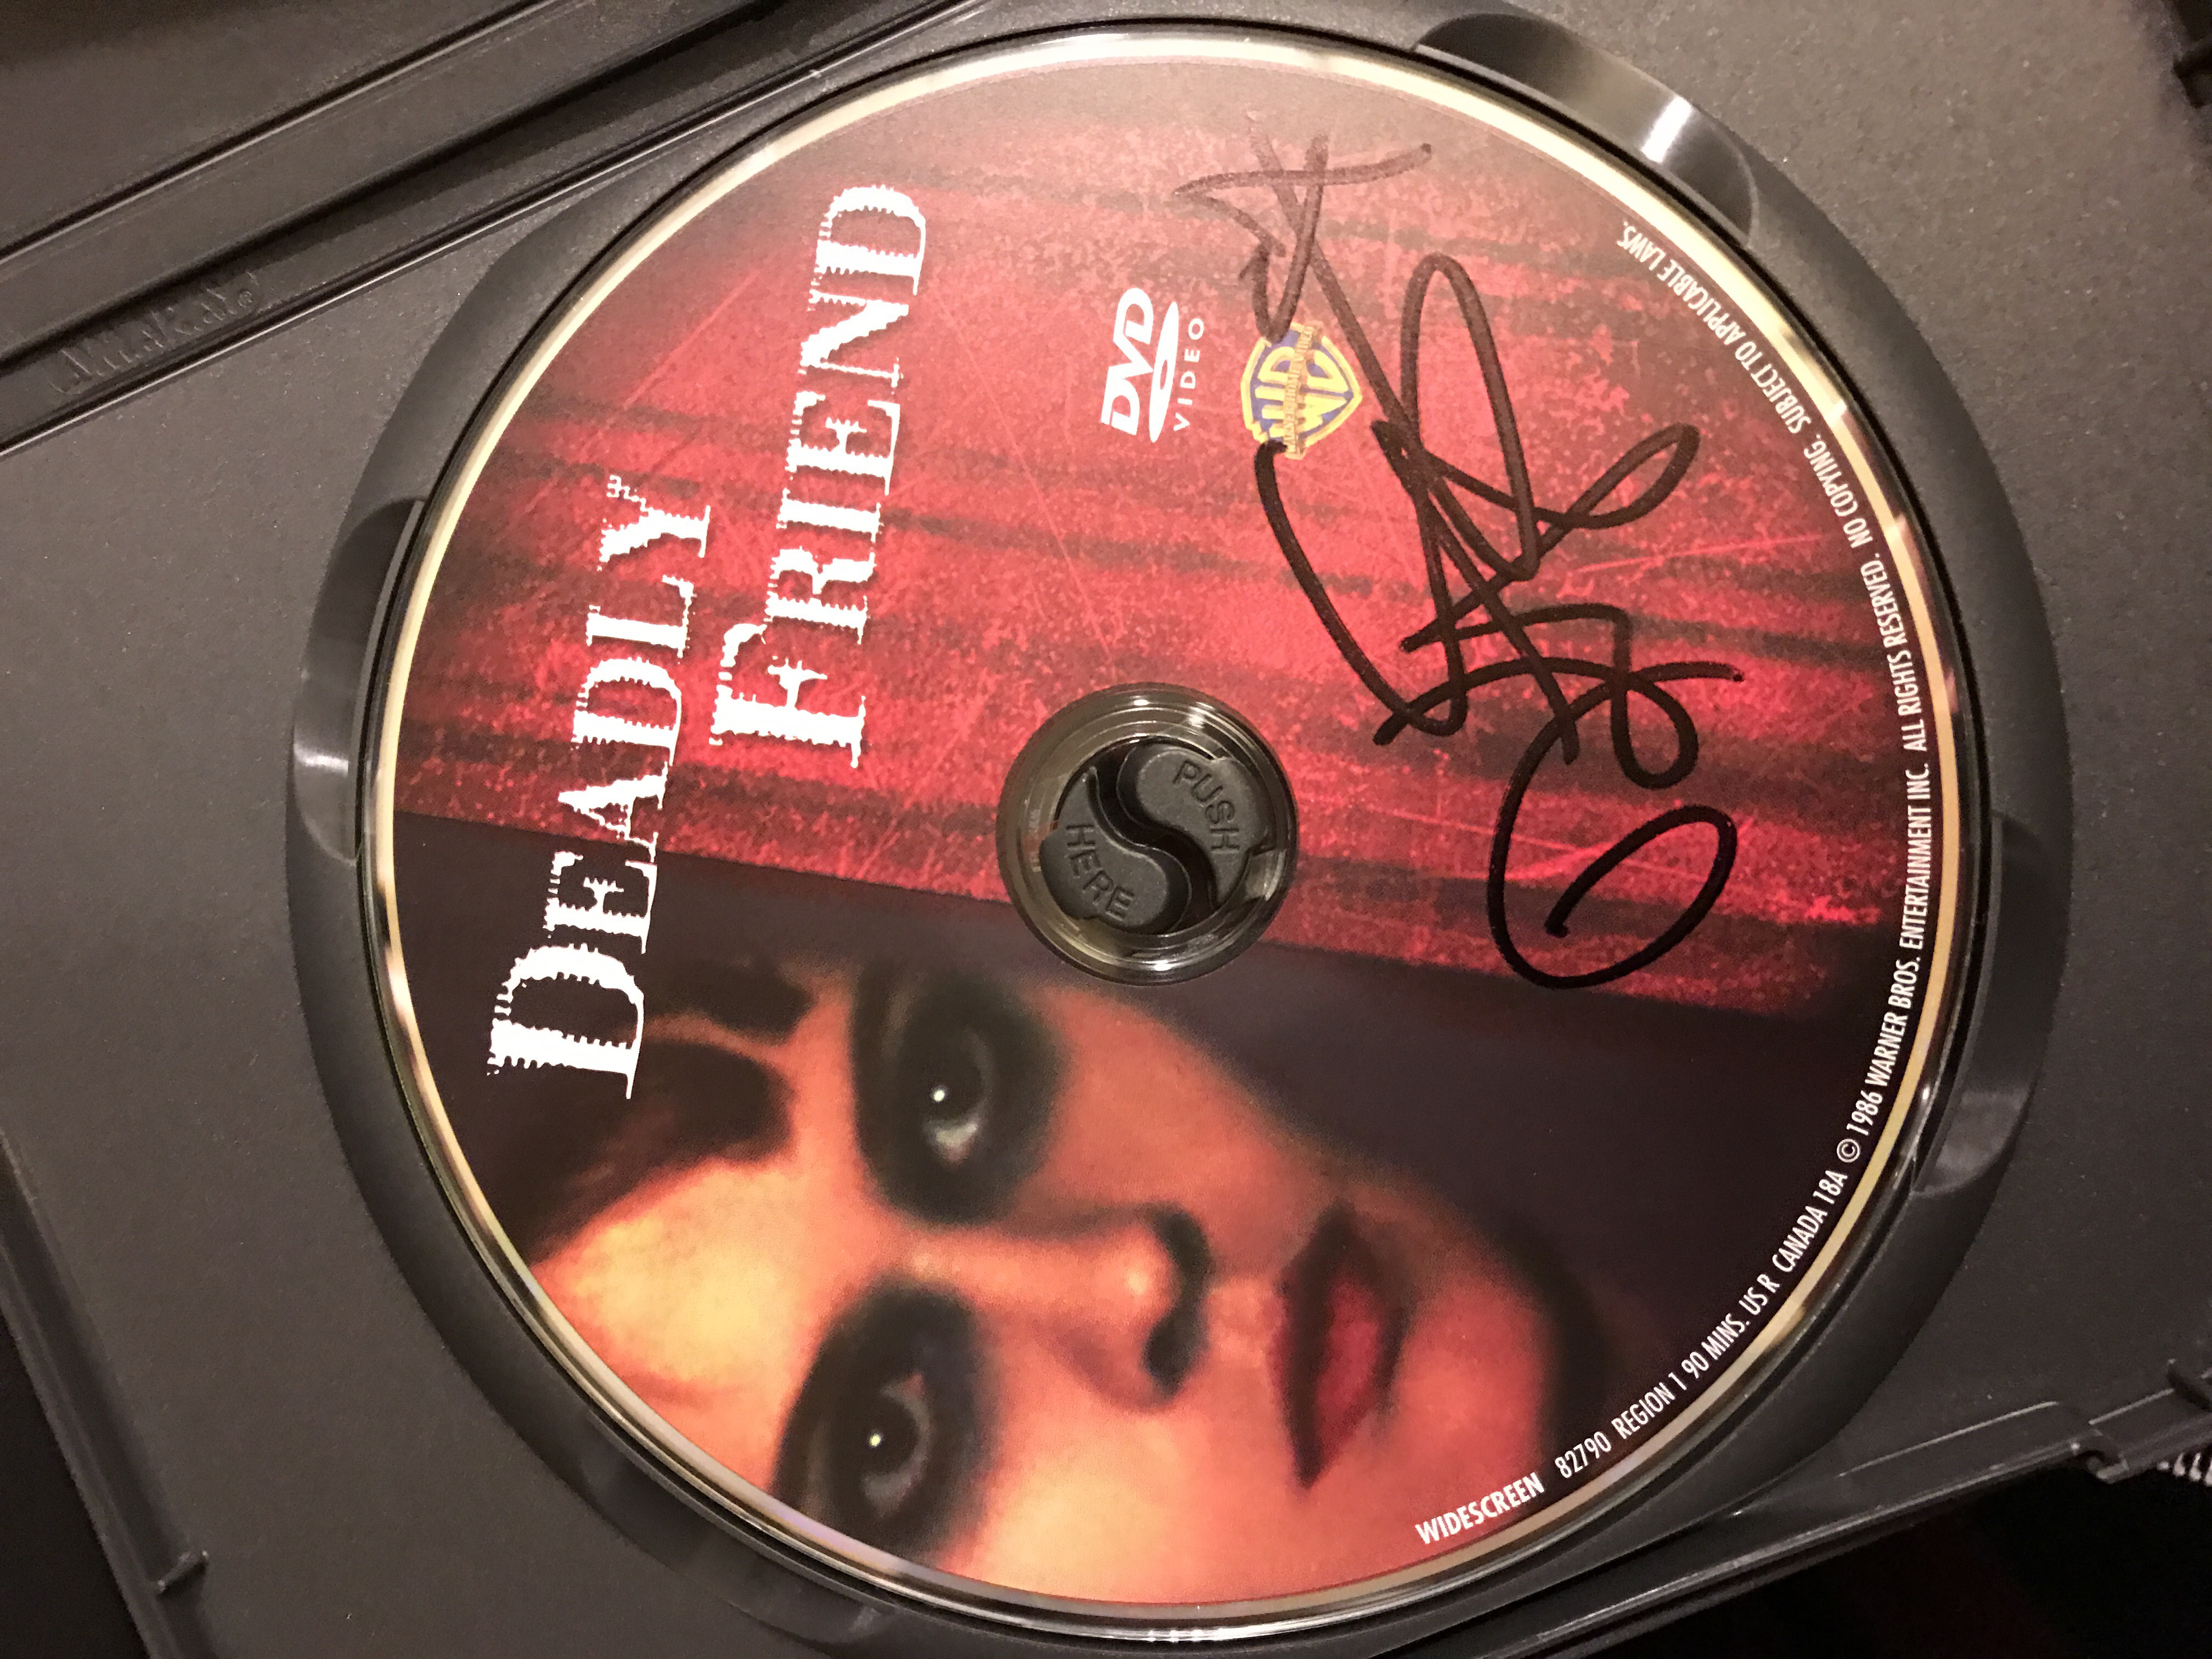 "Deadly Friend" disc signed by actress Kristy Swanson